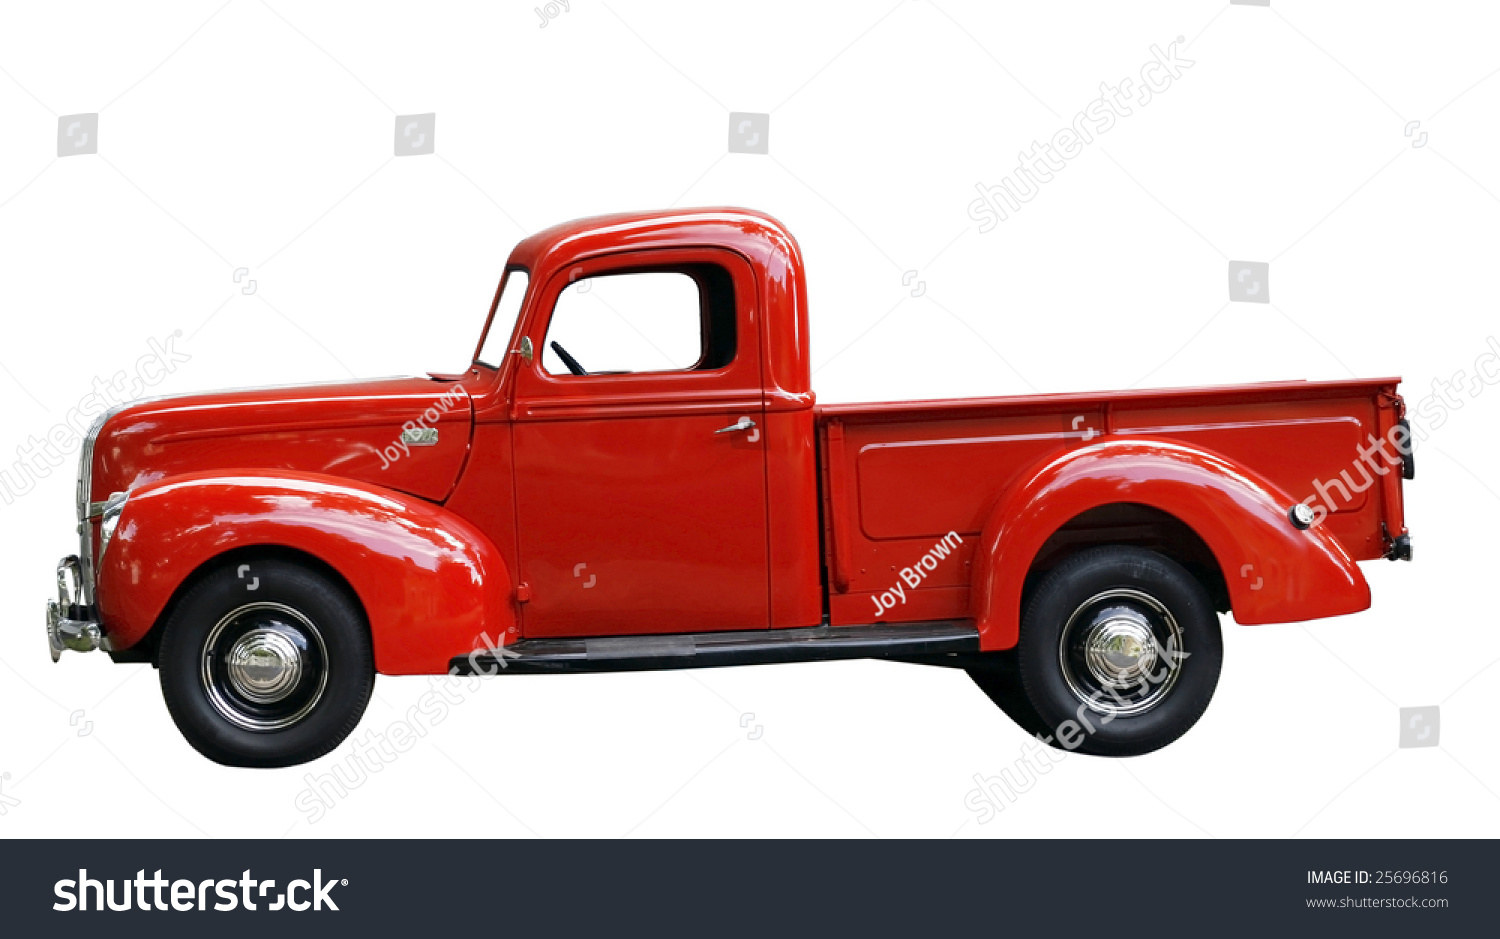 Vintage Red Truck Clipping Path Stock Photo 25696816  Shutterstock